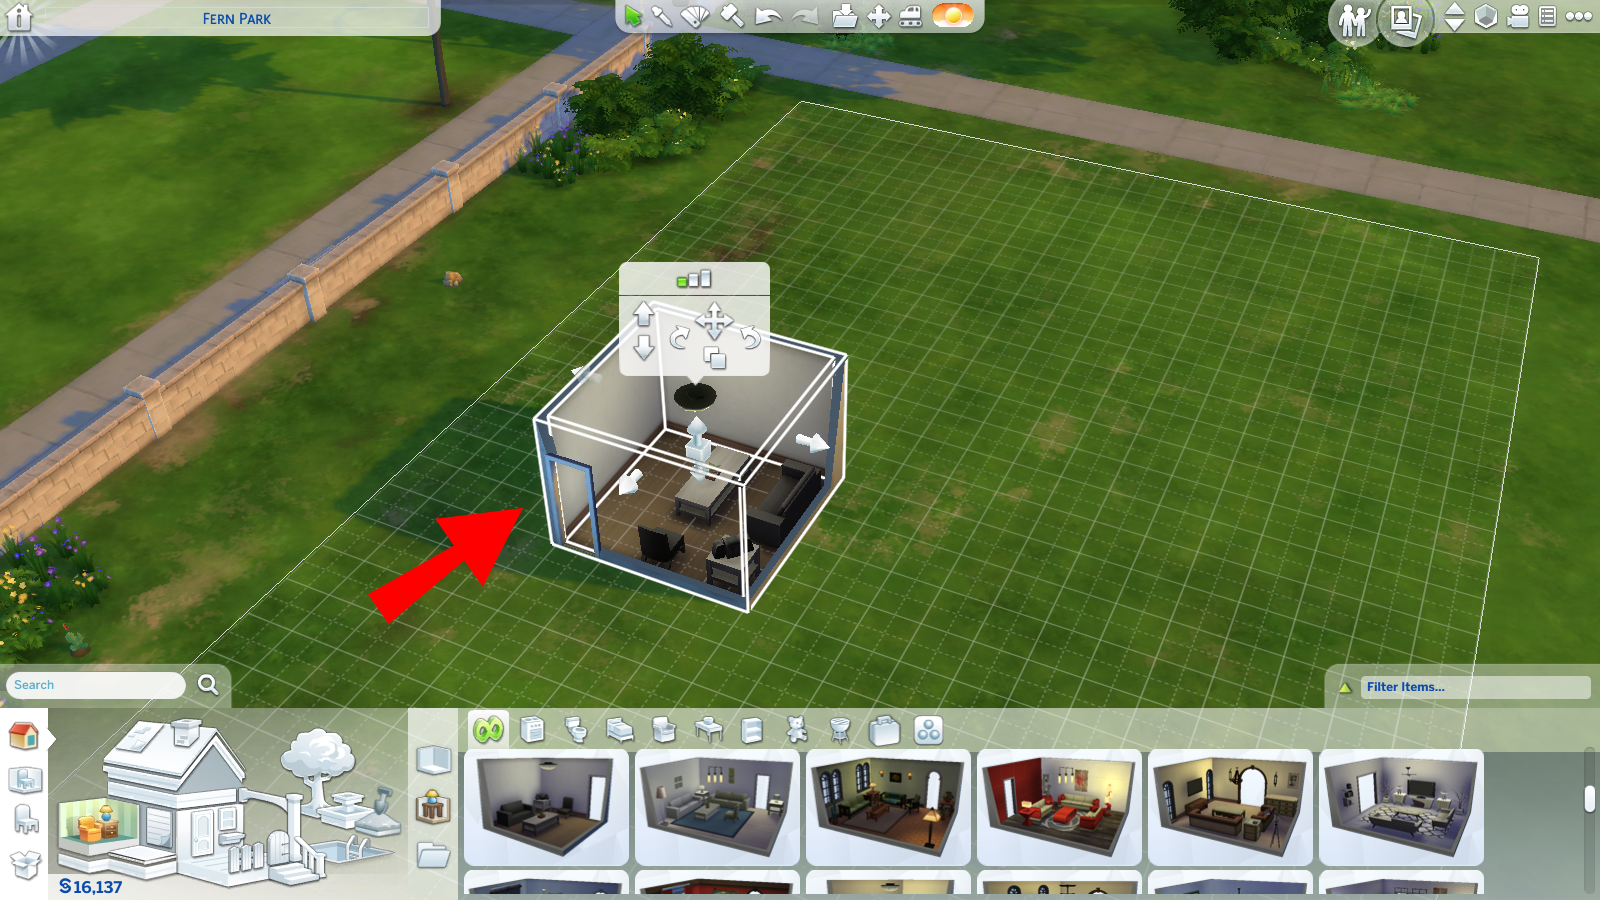 How to Rotate Objects in Sims 4